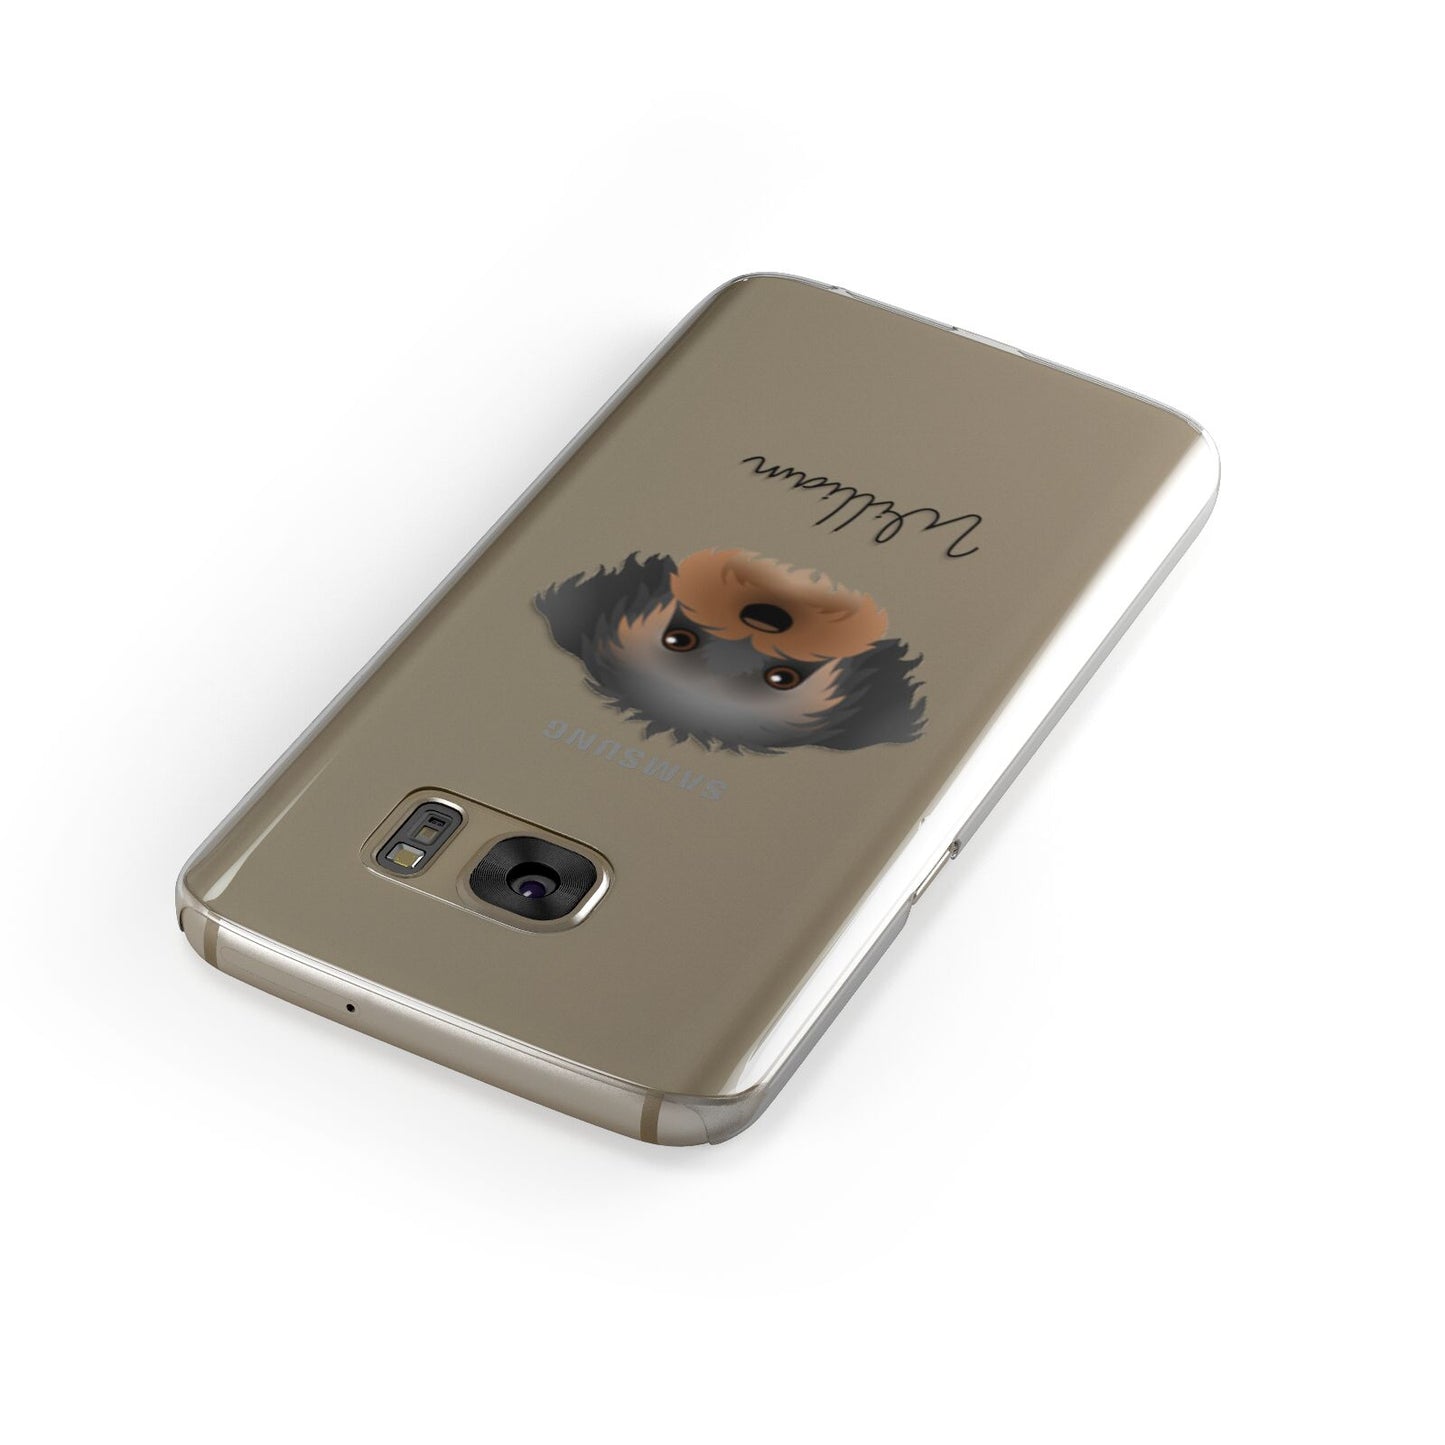 Yorkipoo Personalised Samsung Galaxy Case Front Close Up